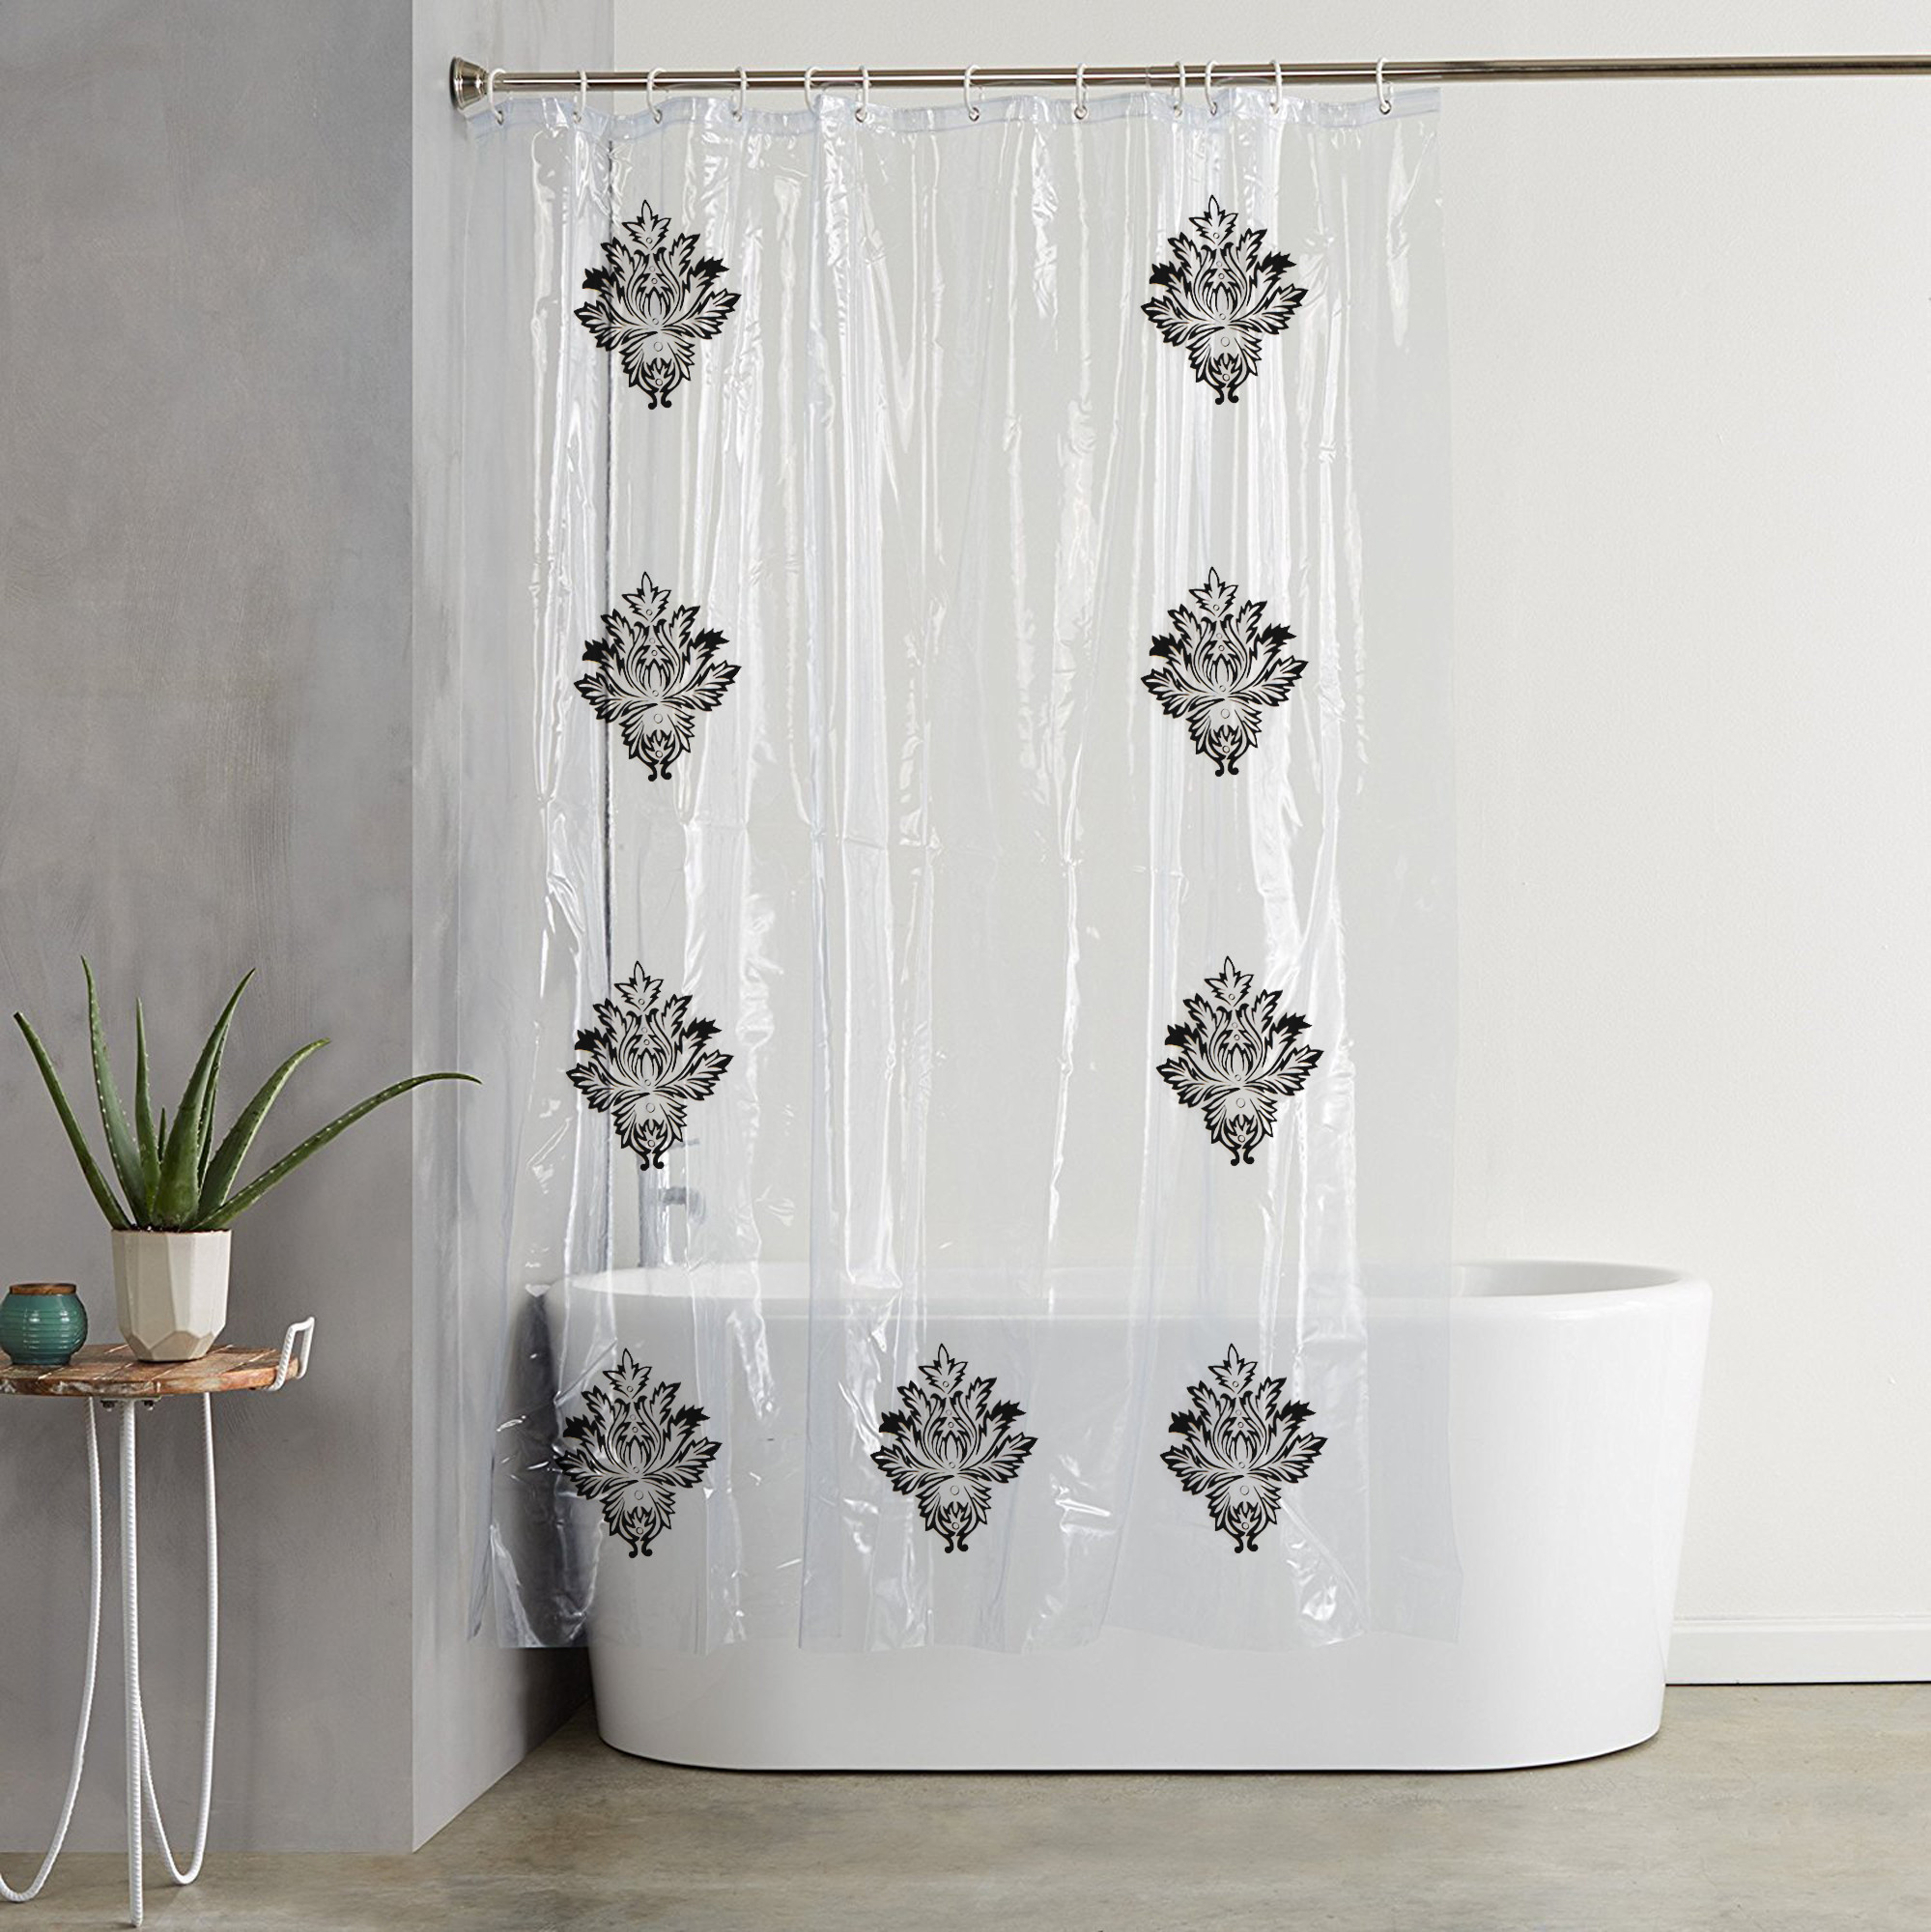 Kuber Industries 0.30mm Rangoli Printed Stain Resistant, No Odor, Waterproof PVC AC/Shower Curtain With Hooks,7 Feet (Transparent)